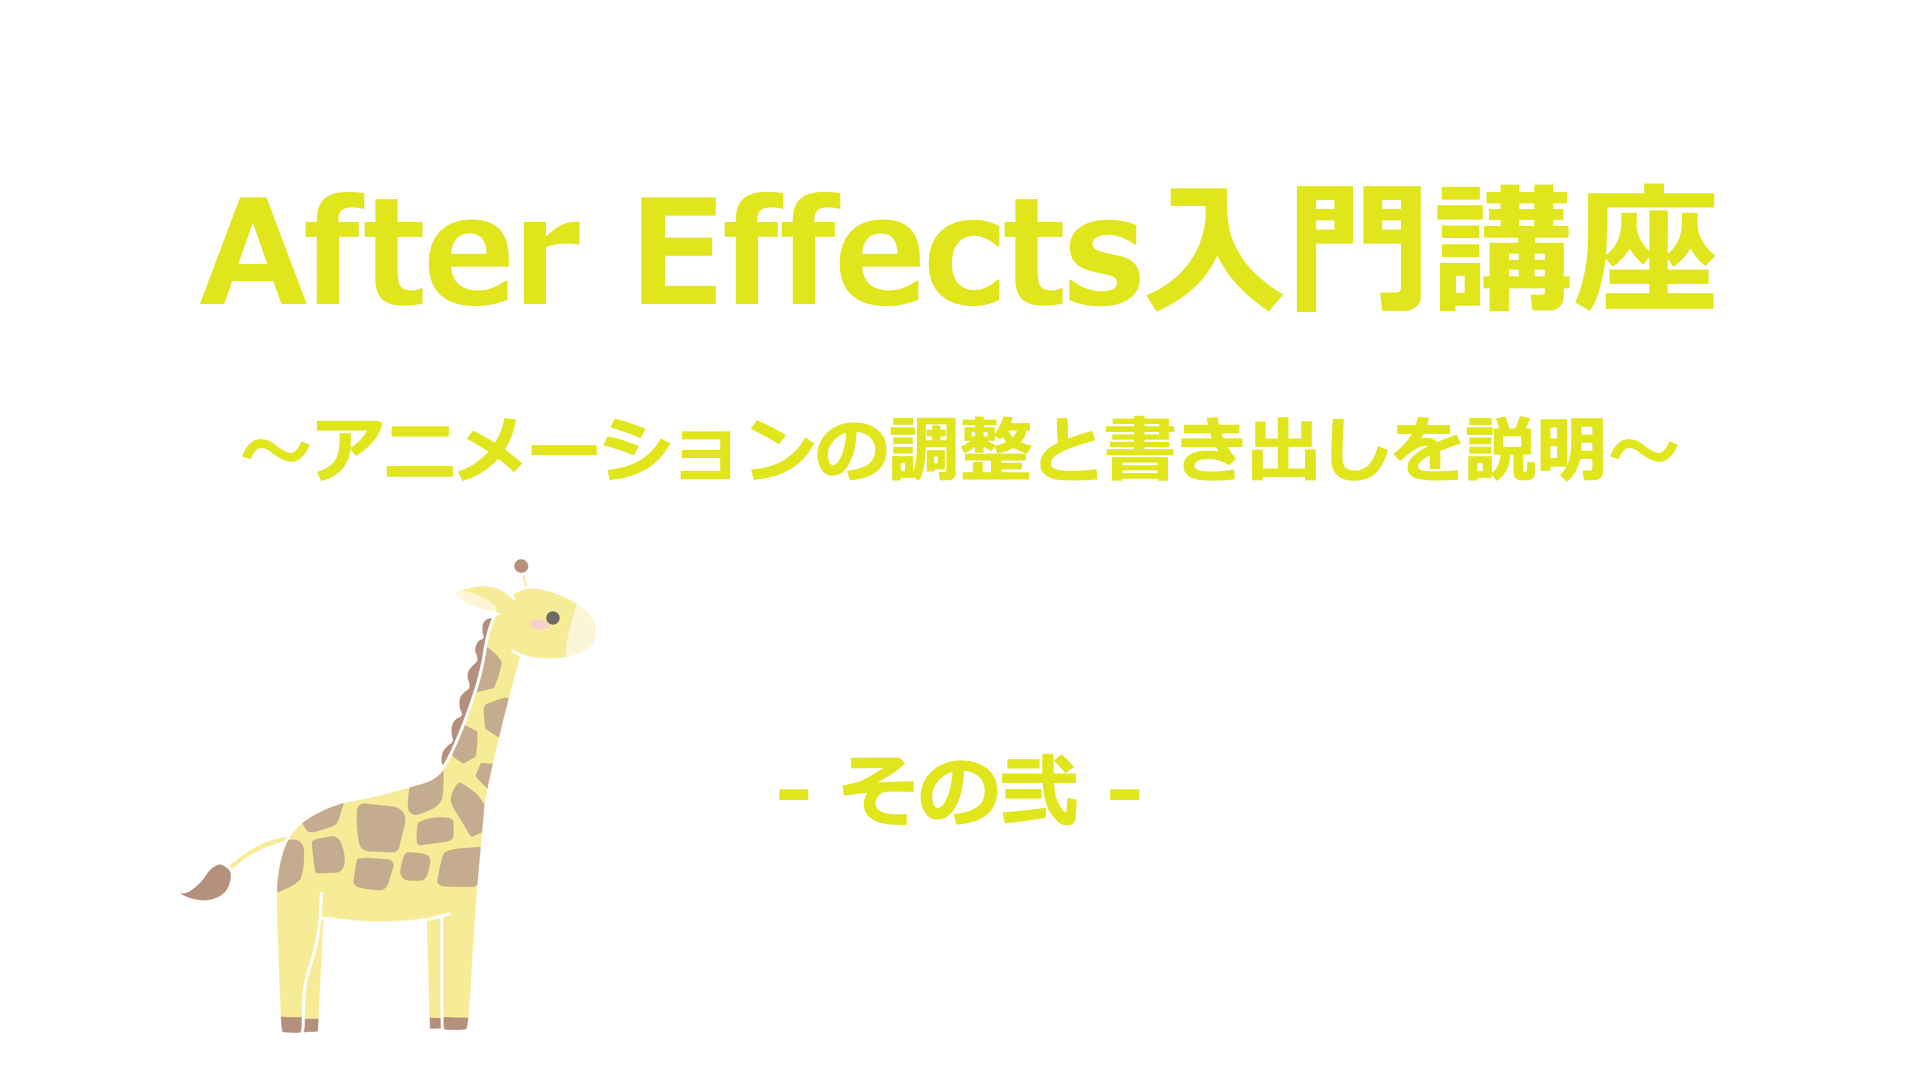 AfterEffects02アイキャッチ